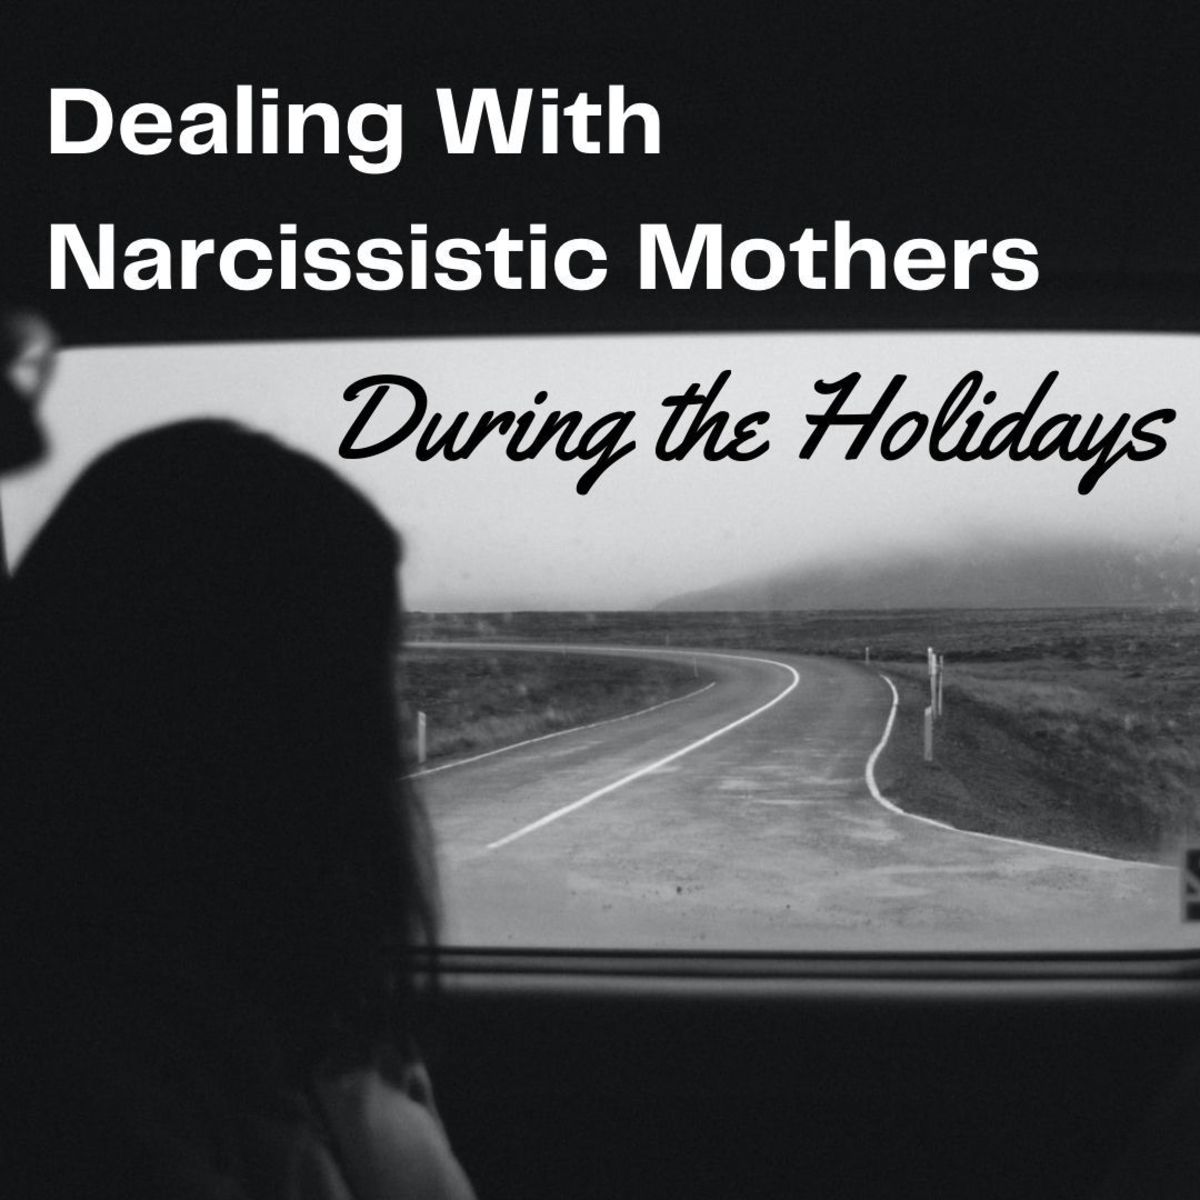 How to Deal With Narcissistic Mothers During the Holidays